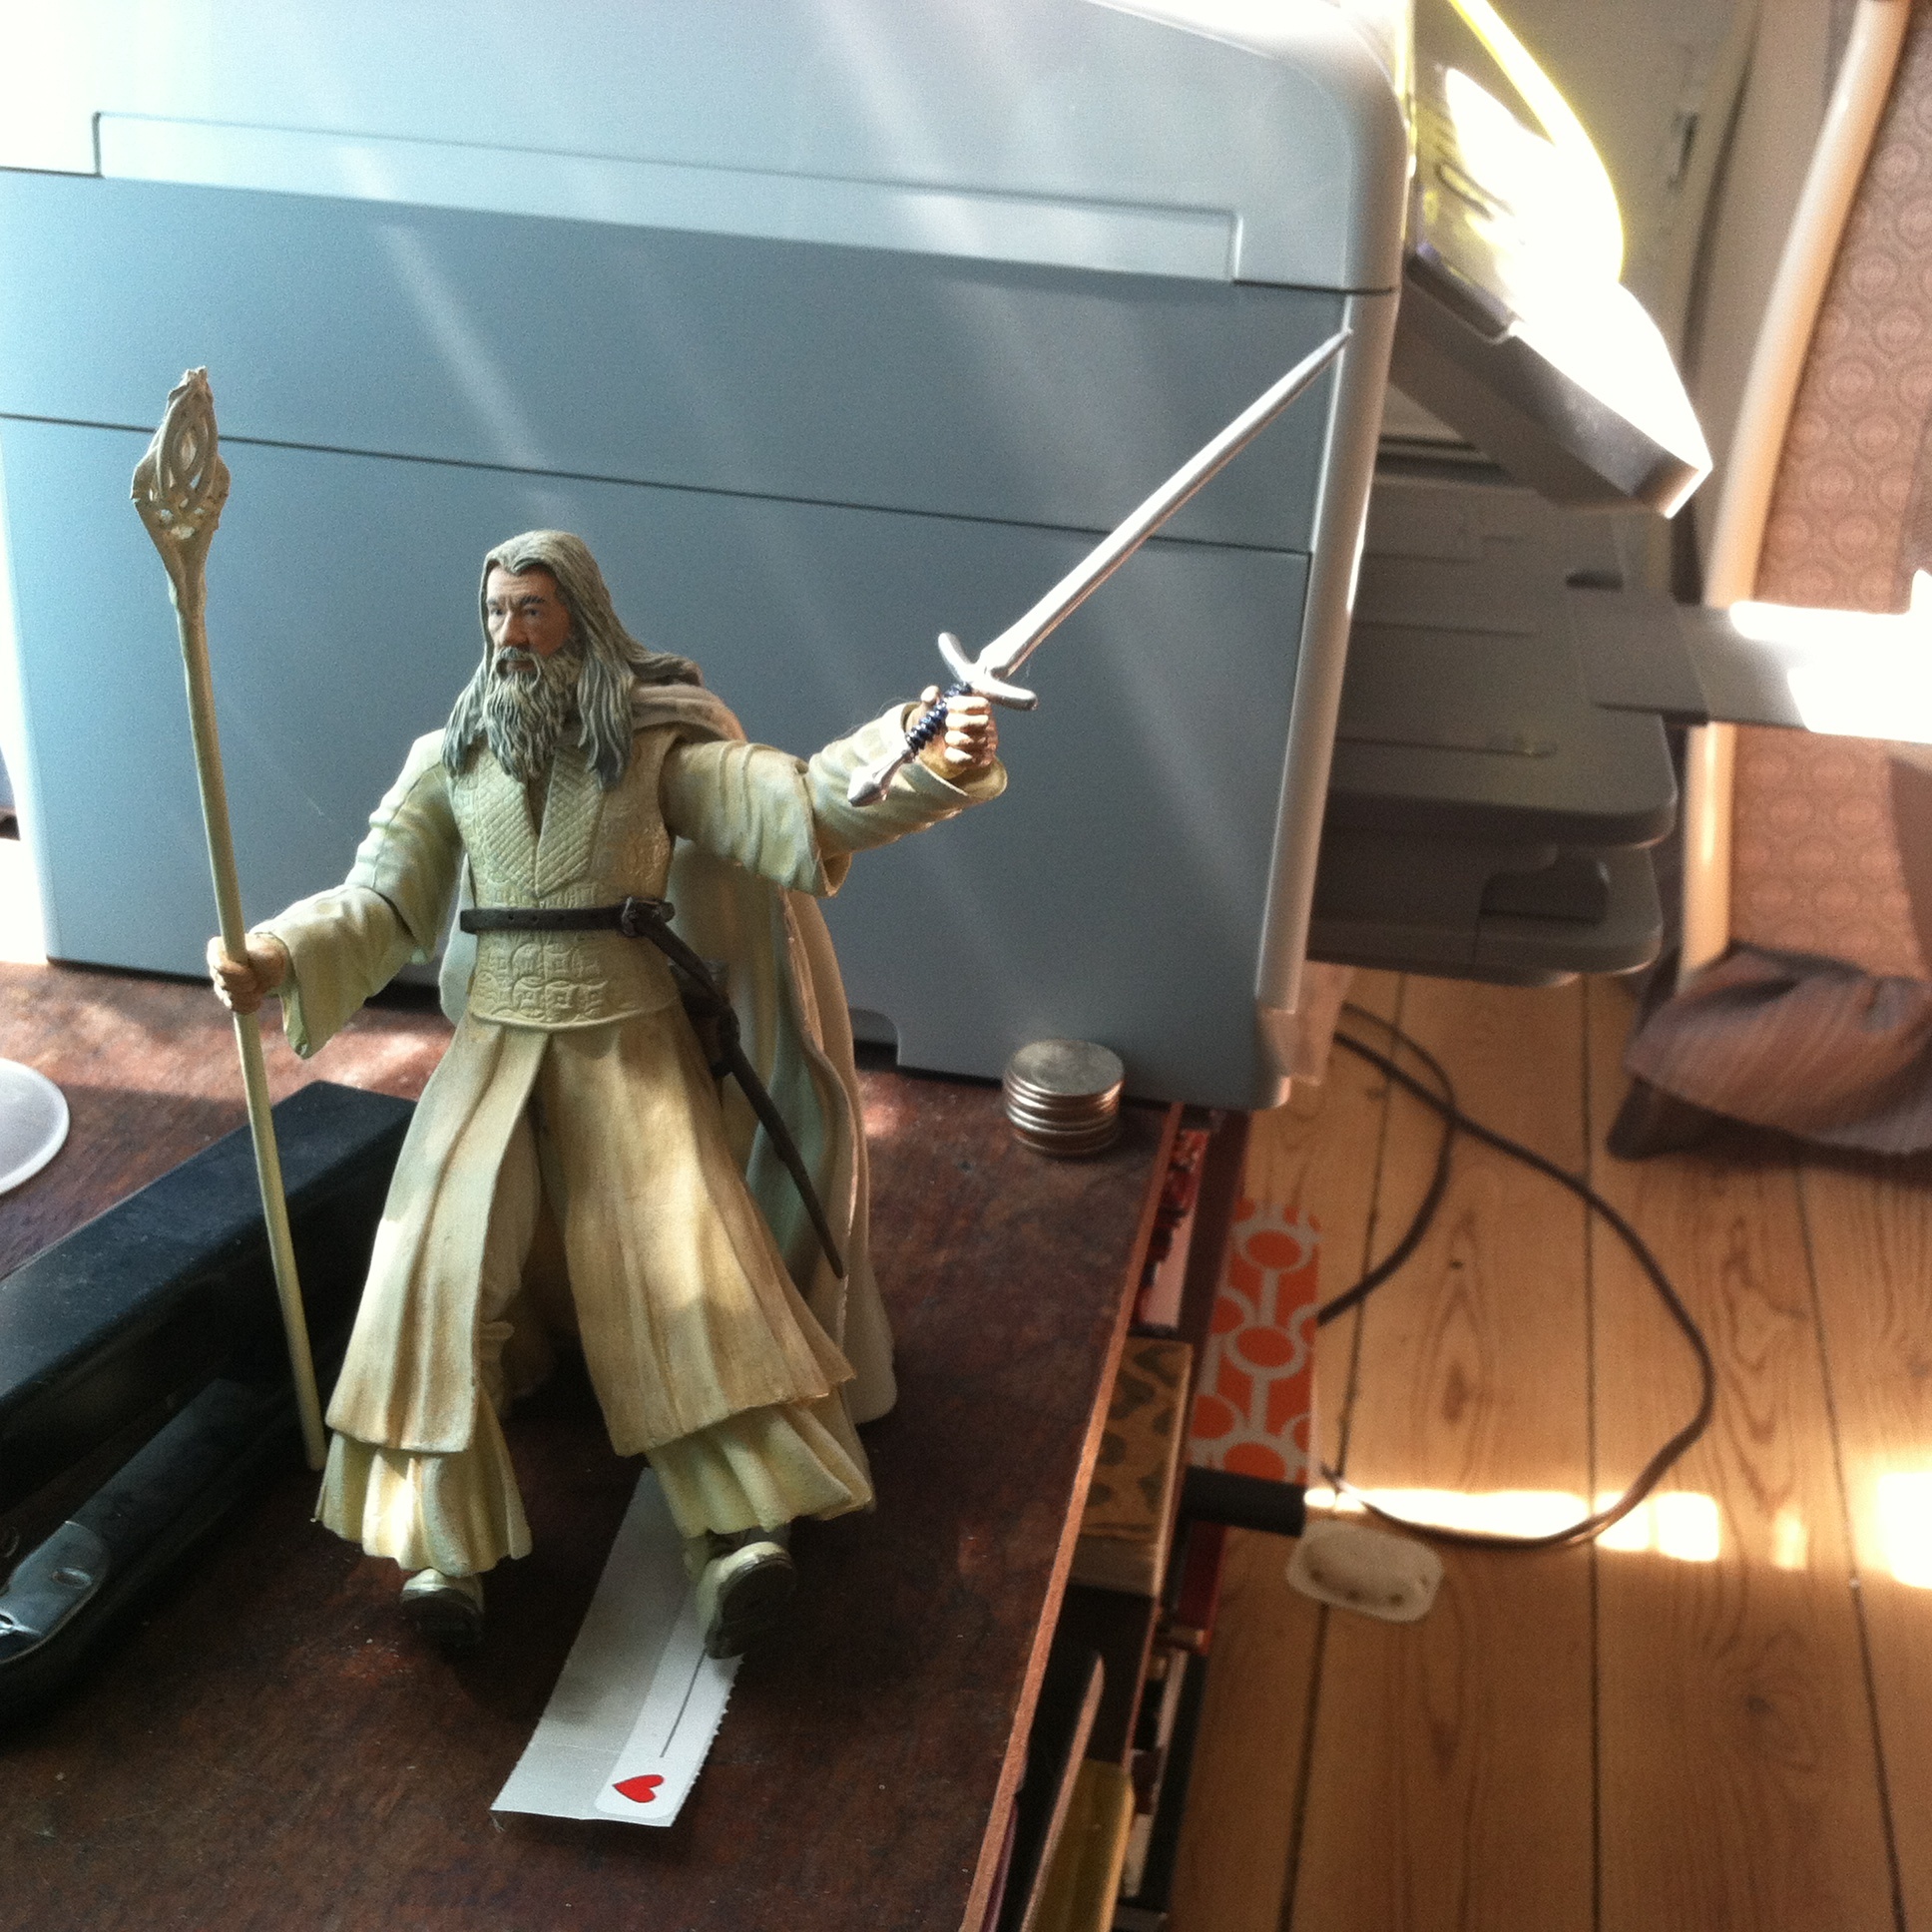 Oh, you need to use the printer? YOU SHALL NOT PASS.